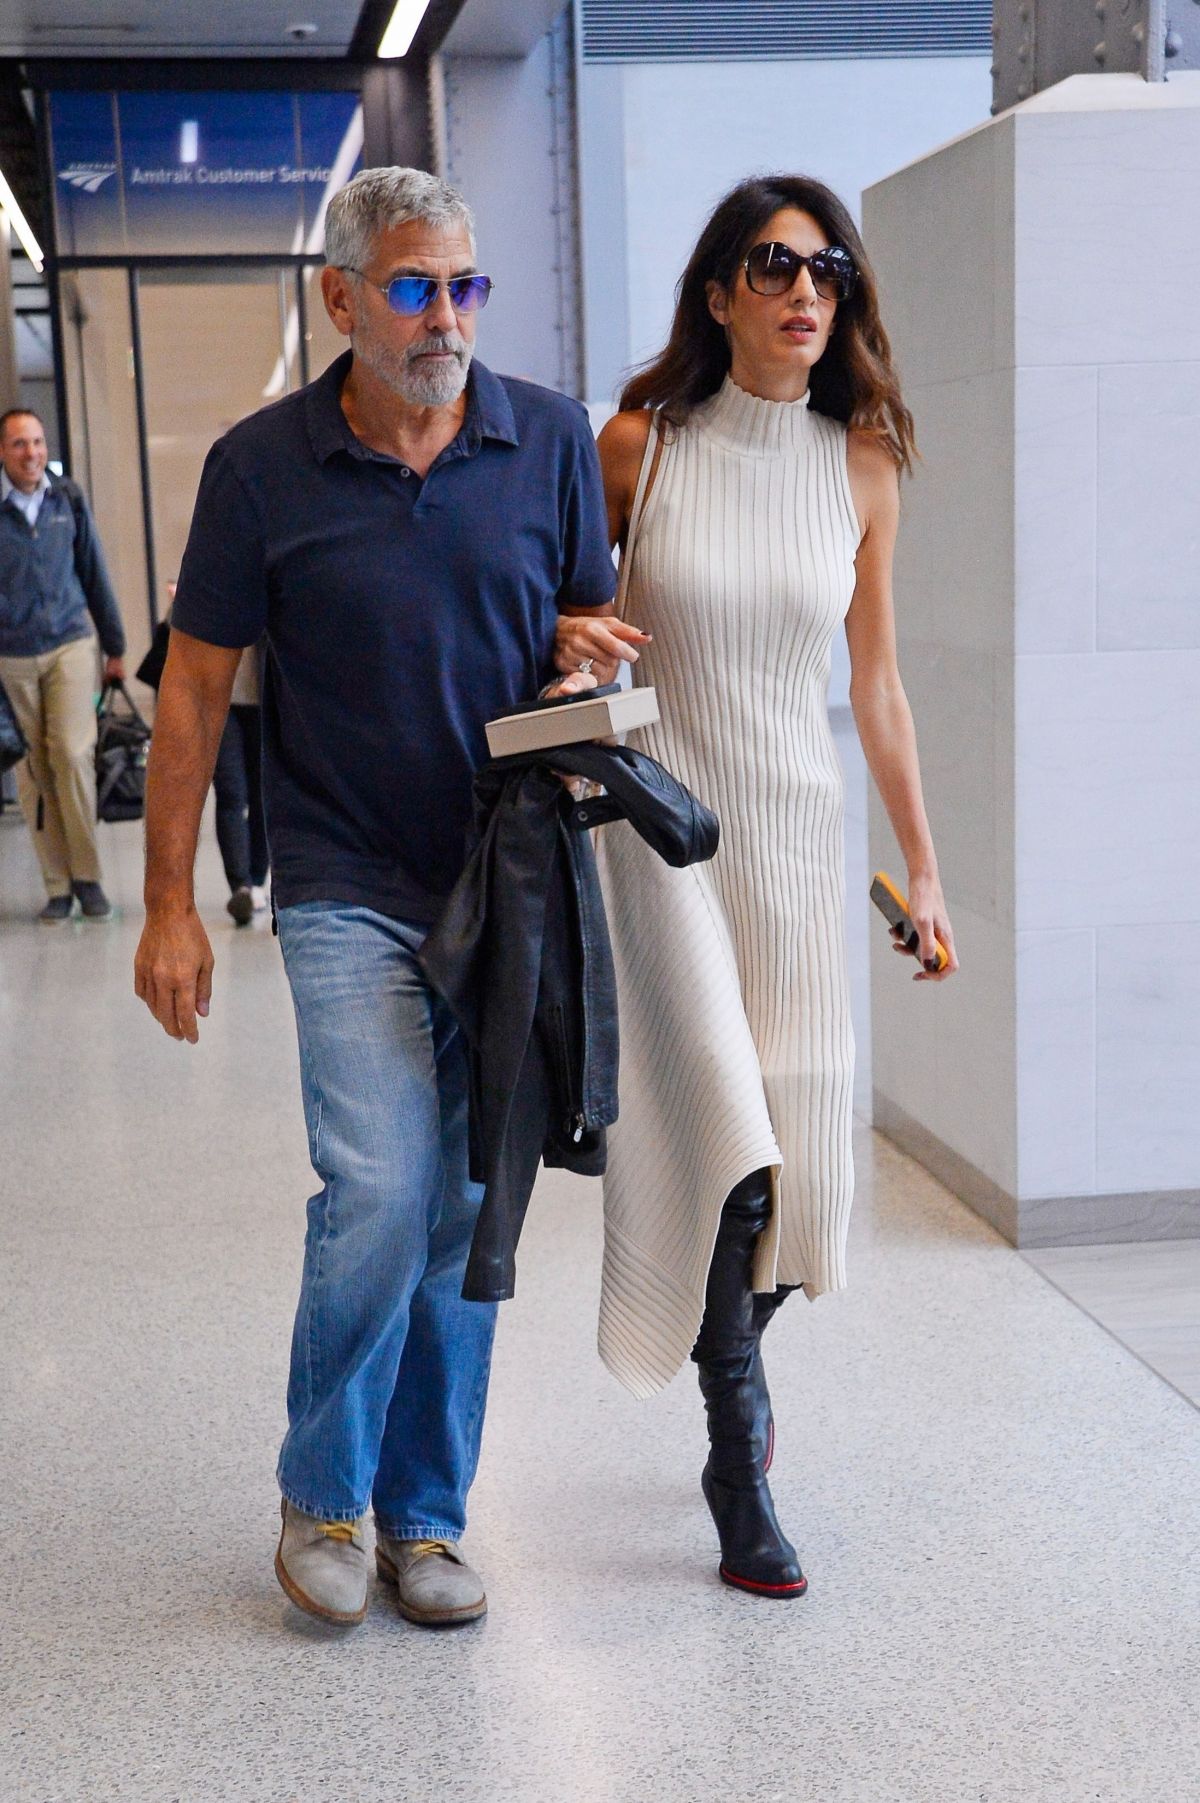 AMAL and George CLOONEY Arrives at Moynihan Train Station in New York ...